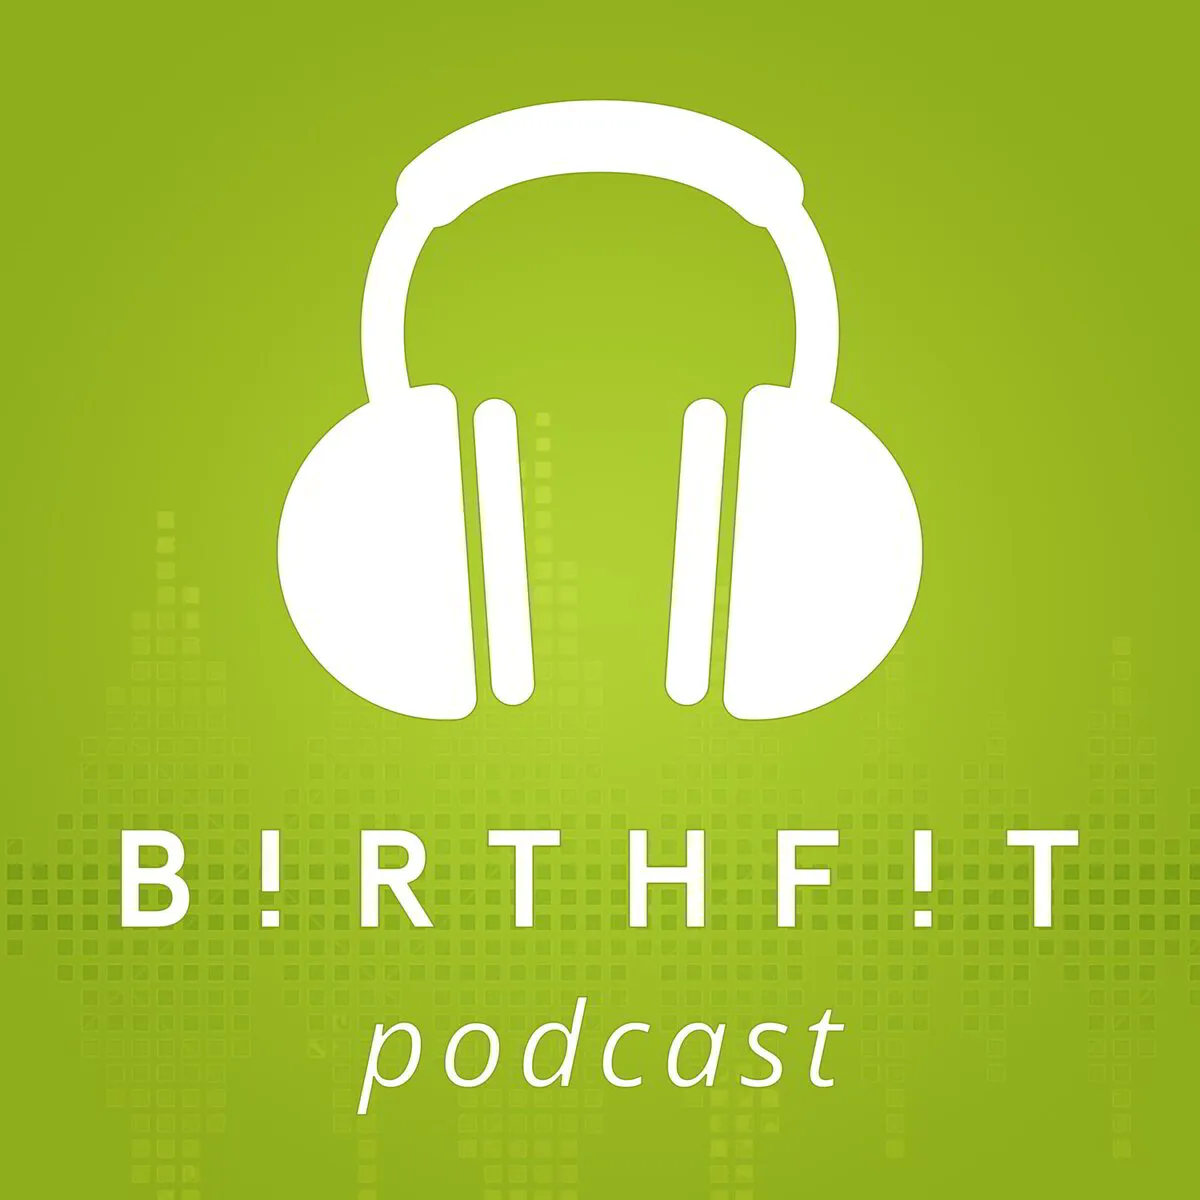 BIRTHFIT Podcast Episode 101 Featuring Nicole Schneider, Founder and CEO of Global NLP Training